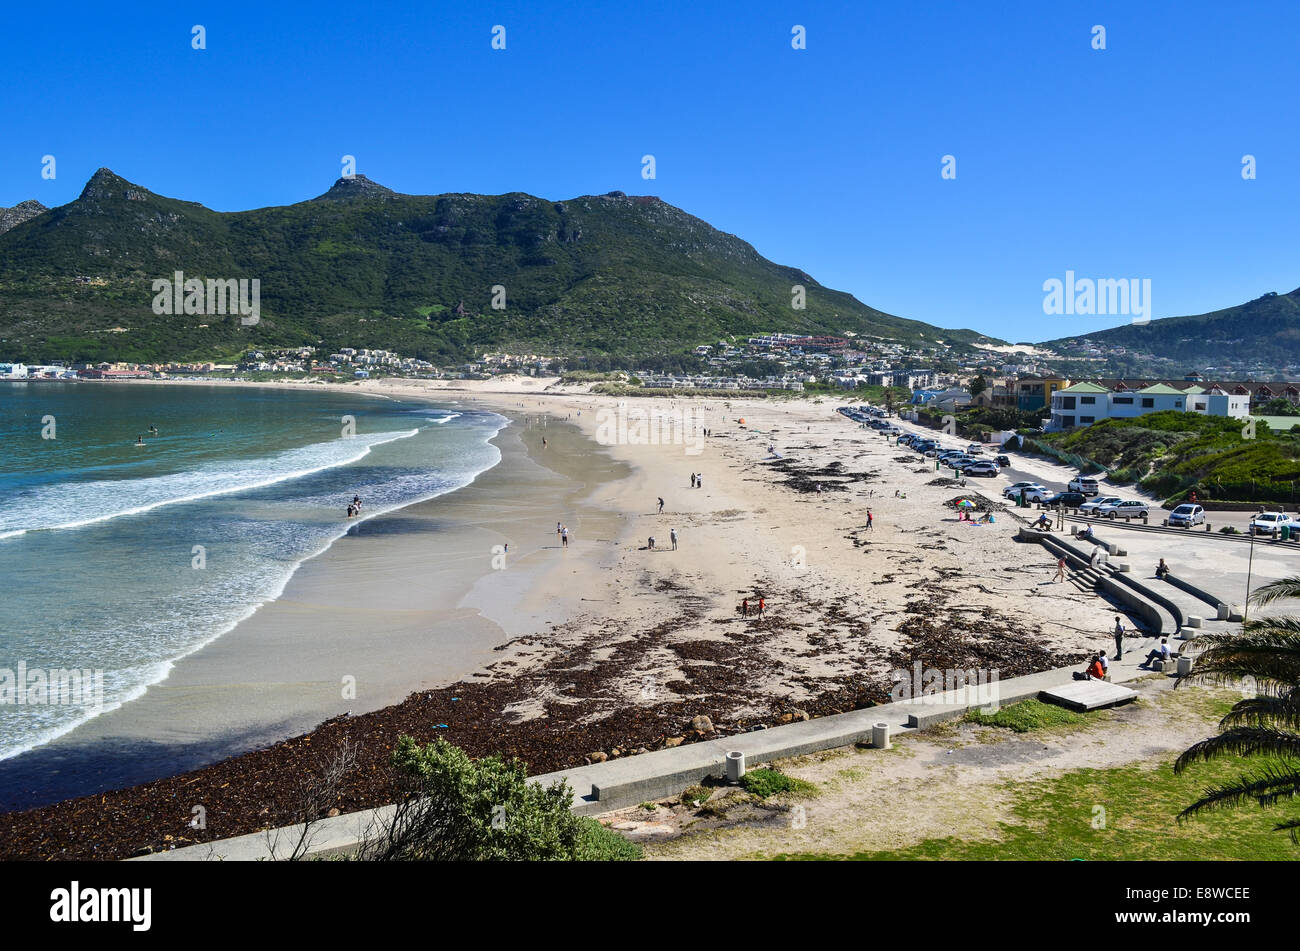 Beach of Hout Bay, Cape Town peninsula, South Africa Stock Photo